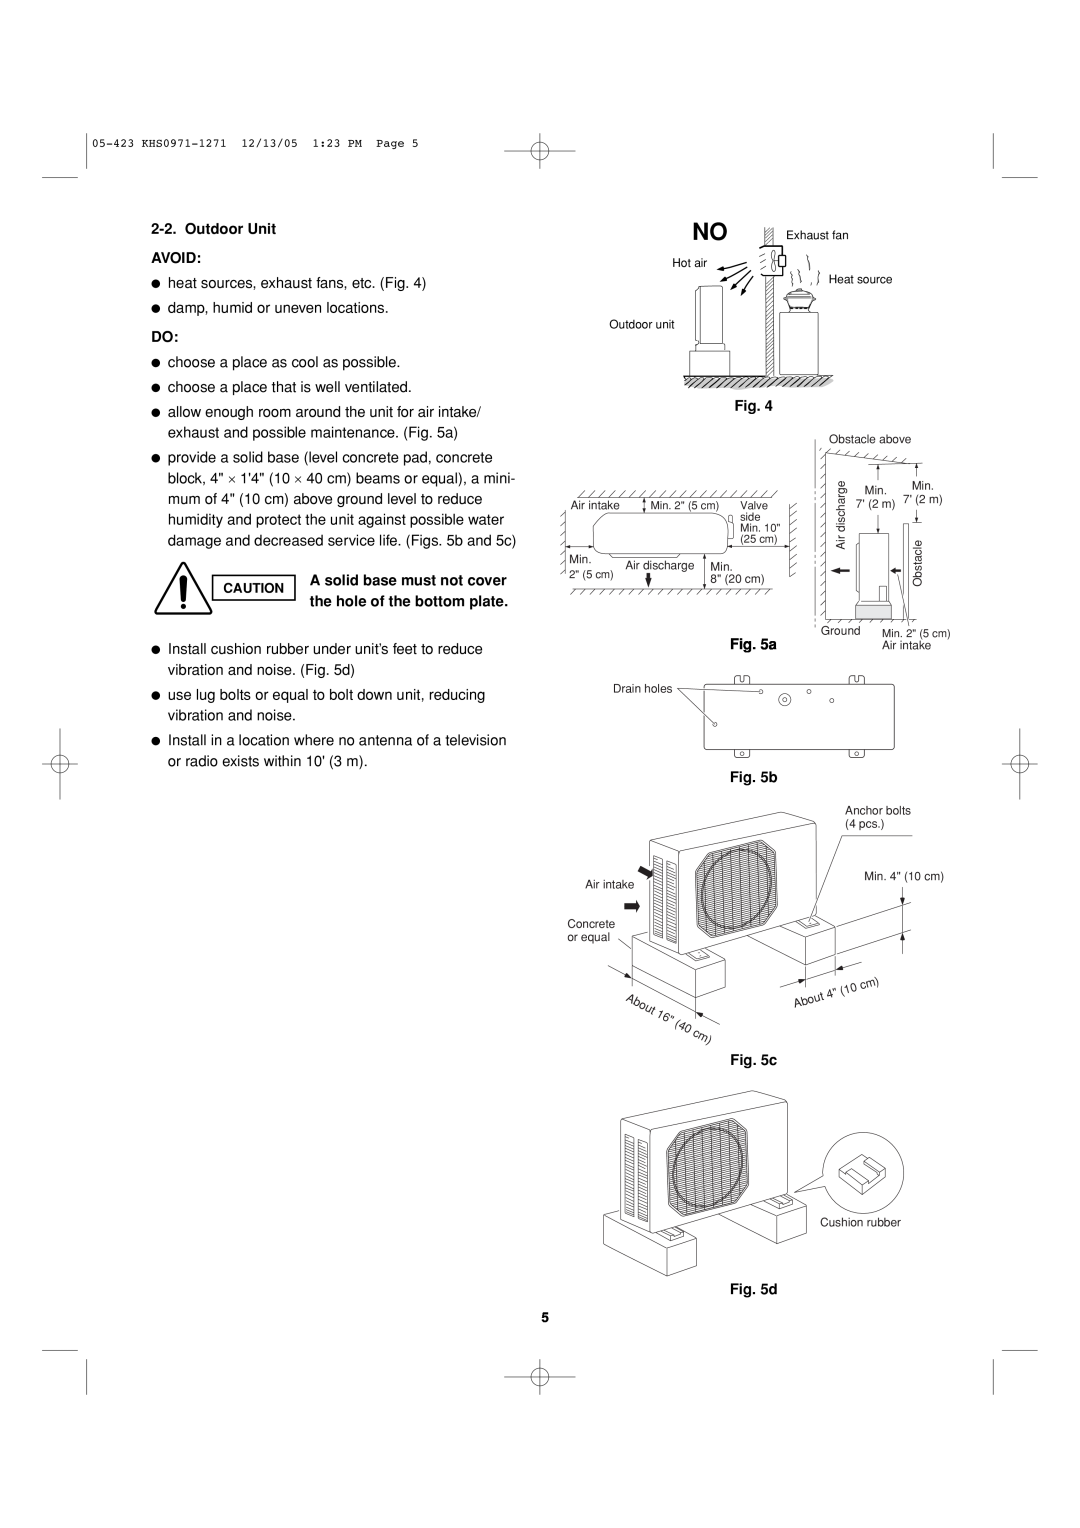 Sanyo 8.53E+13 installation instructions Outdoor Unit AVOID, A solid base must not cover 